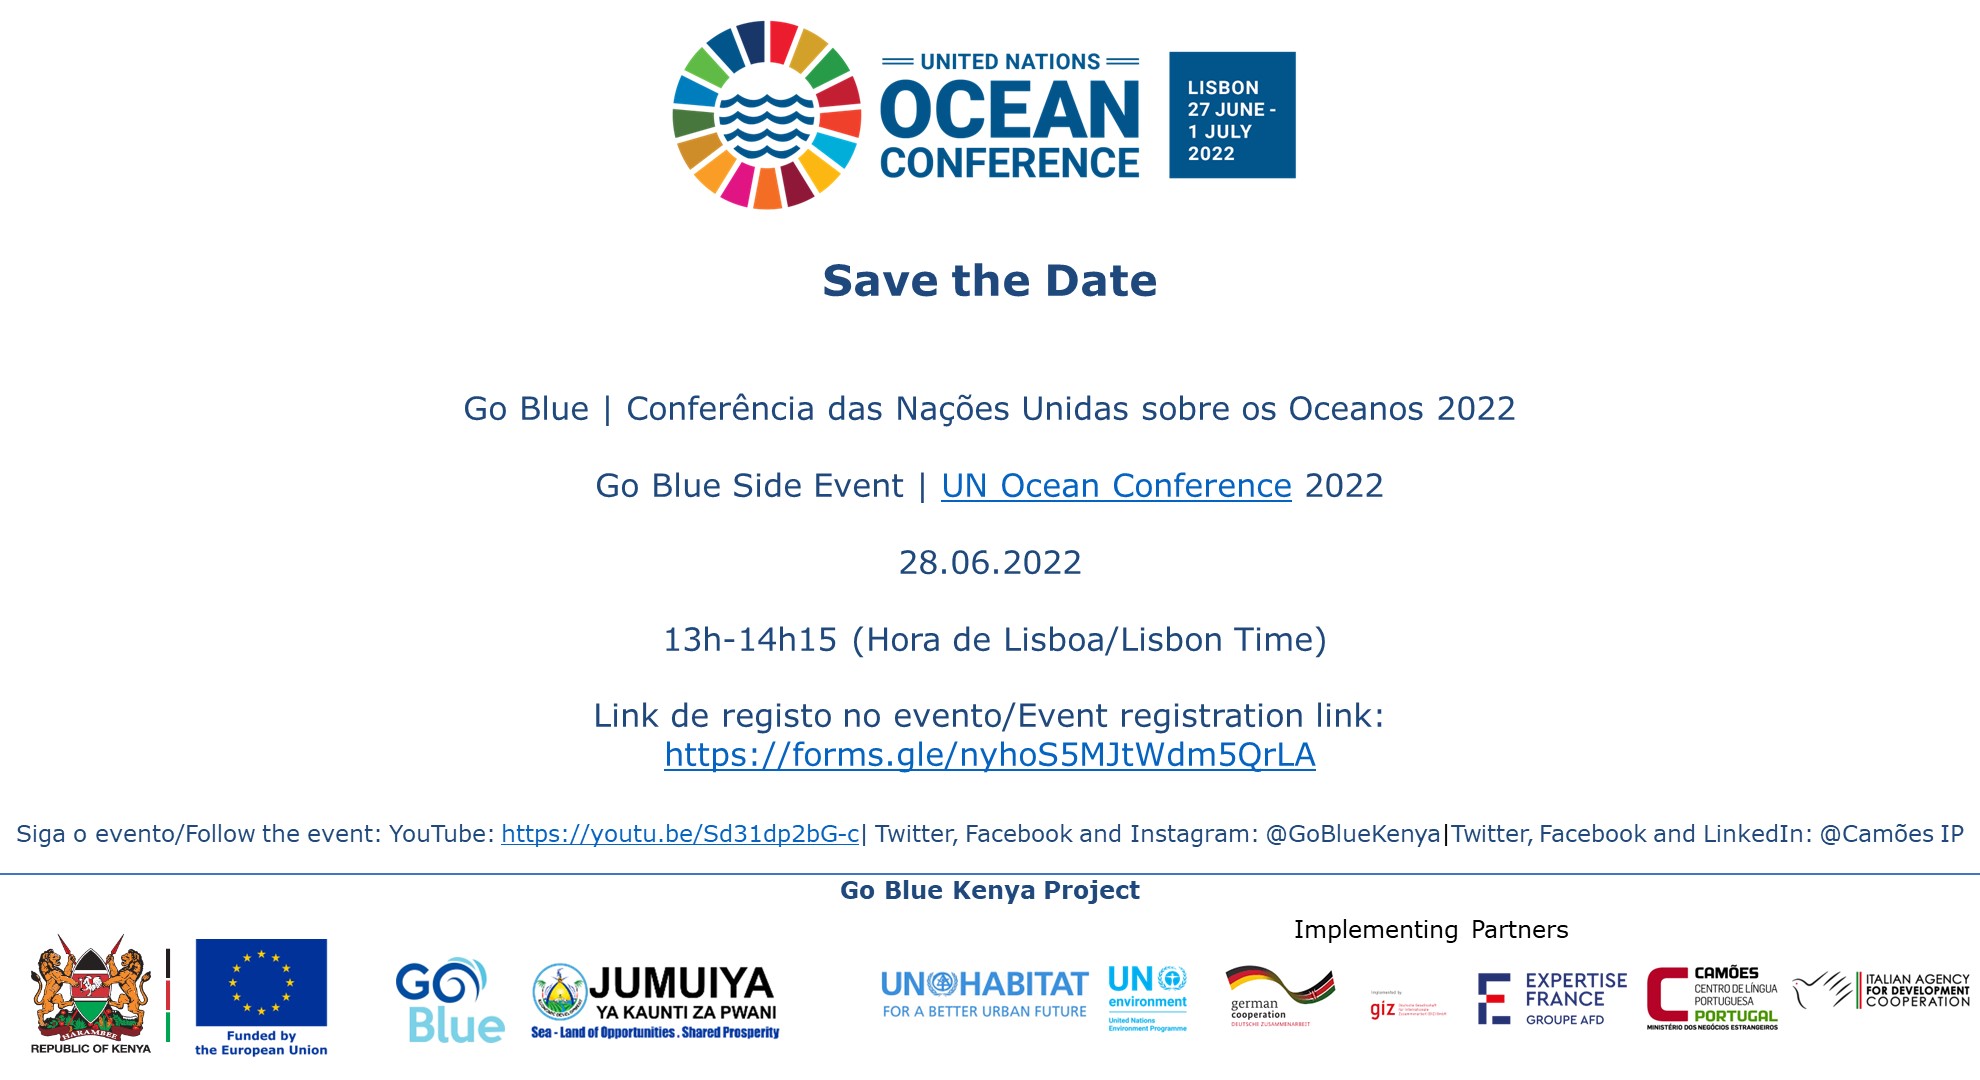 Go Blue Kenya Project Side Event at the United Nations Oceans Conference